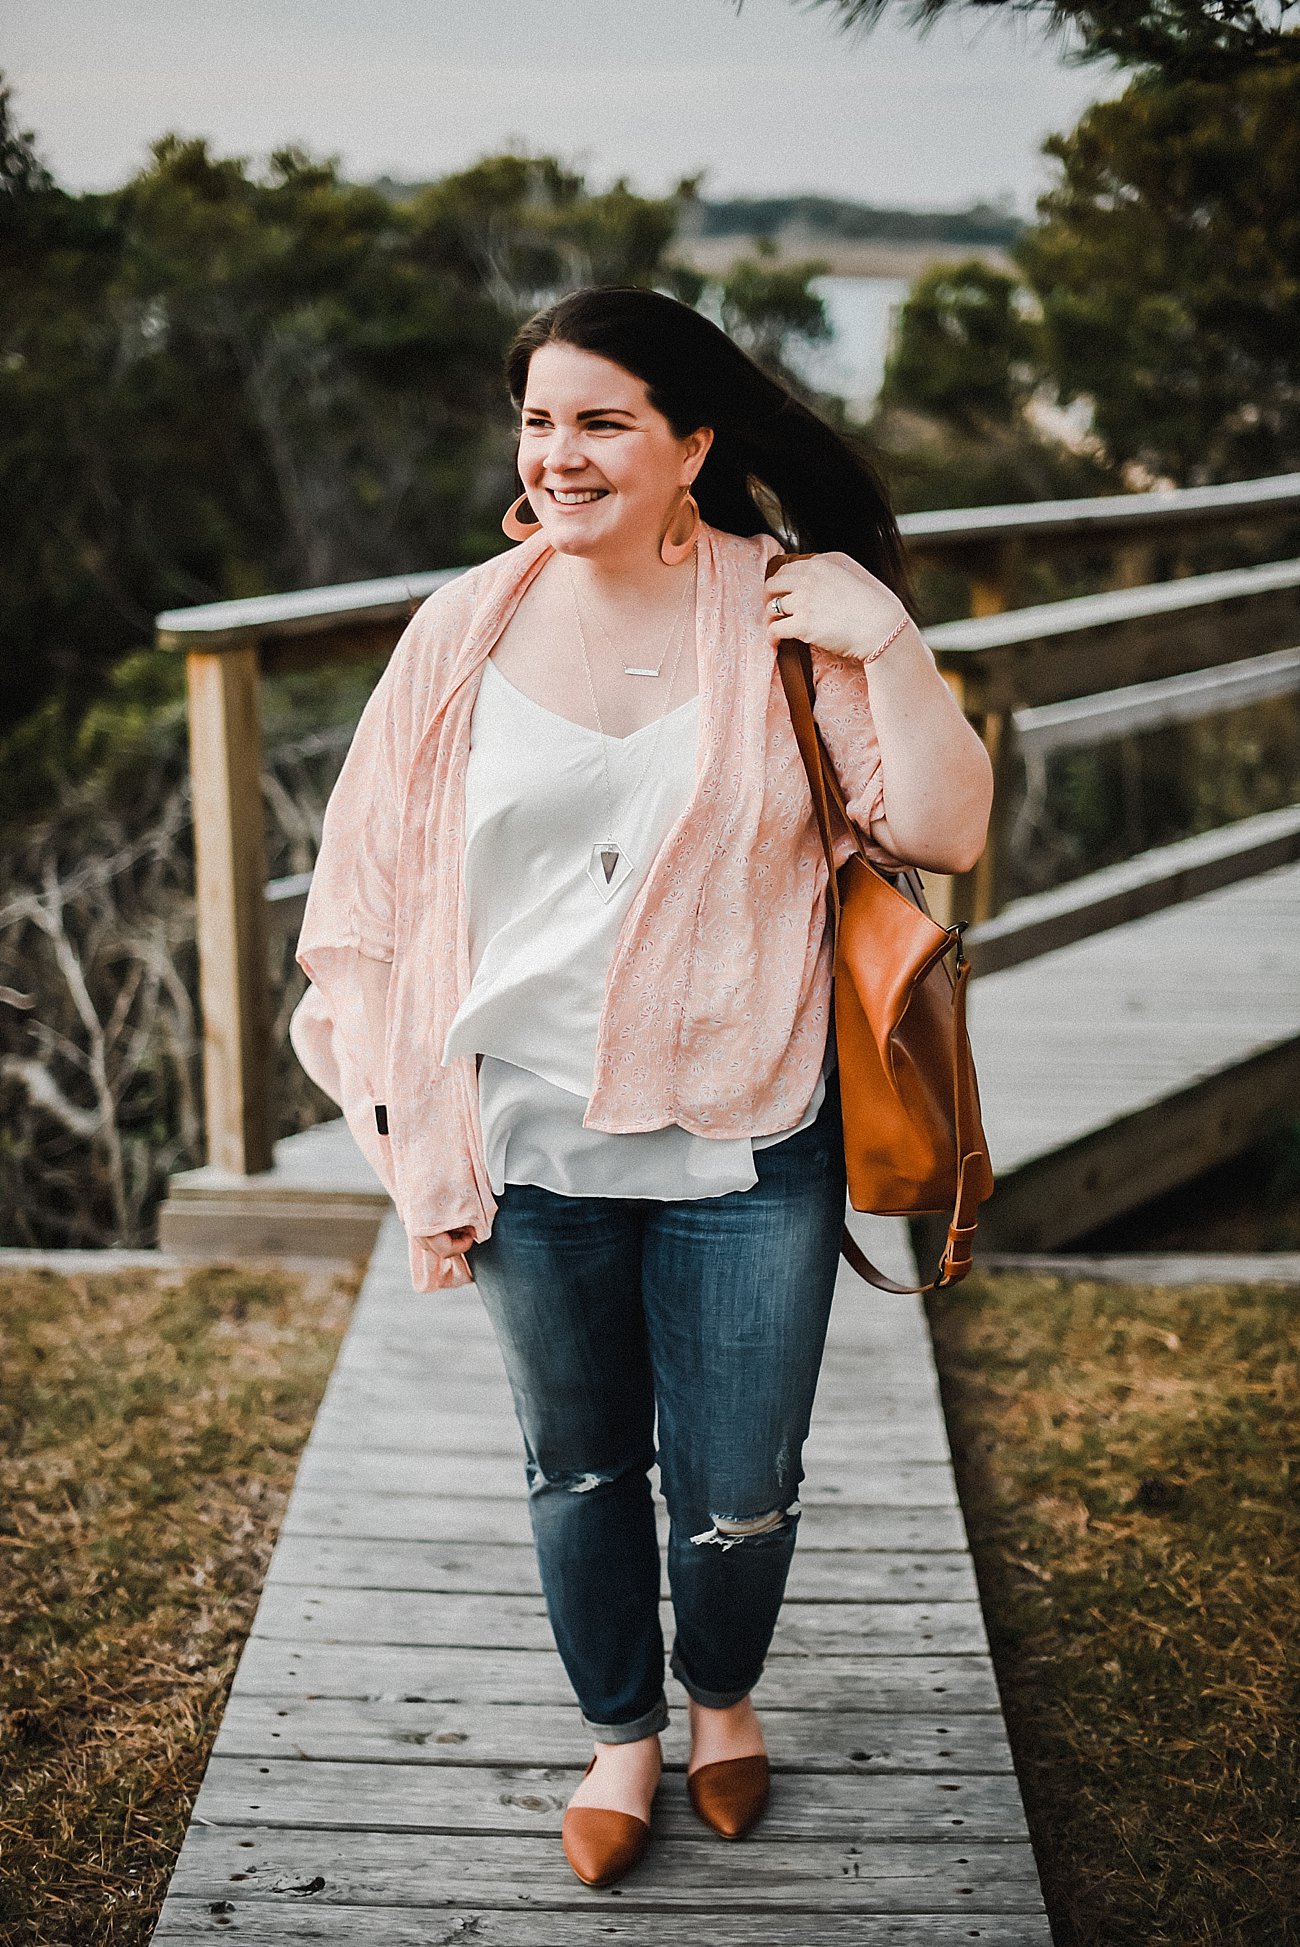 Ethical Fashion blogger - CAUSEBOX Symbology Kimono, Grace & Lace fara combo cami, ABLE high waisted jeans, ABLE tote bag, ABLE shoes (6) - Renewed by popular North Carolina ethical fashion blogger Still Being Molly